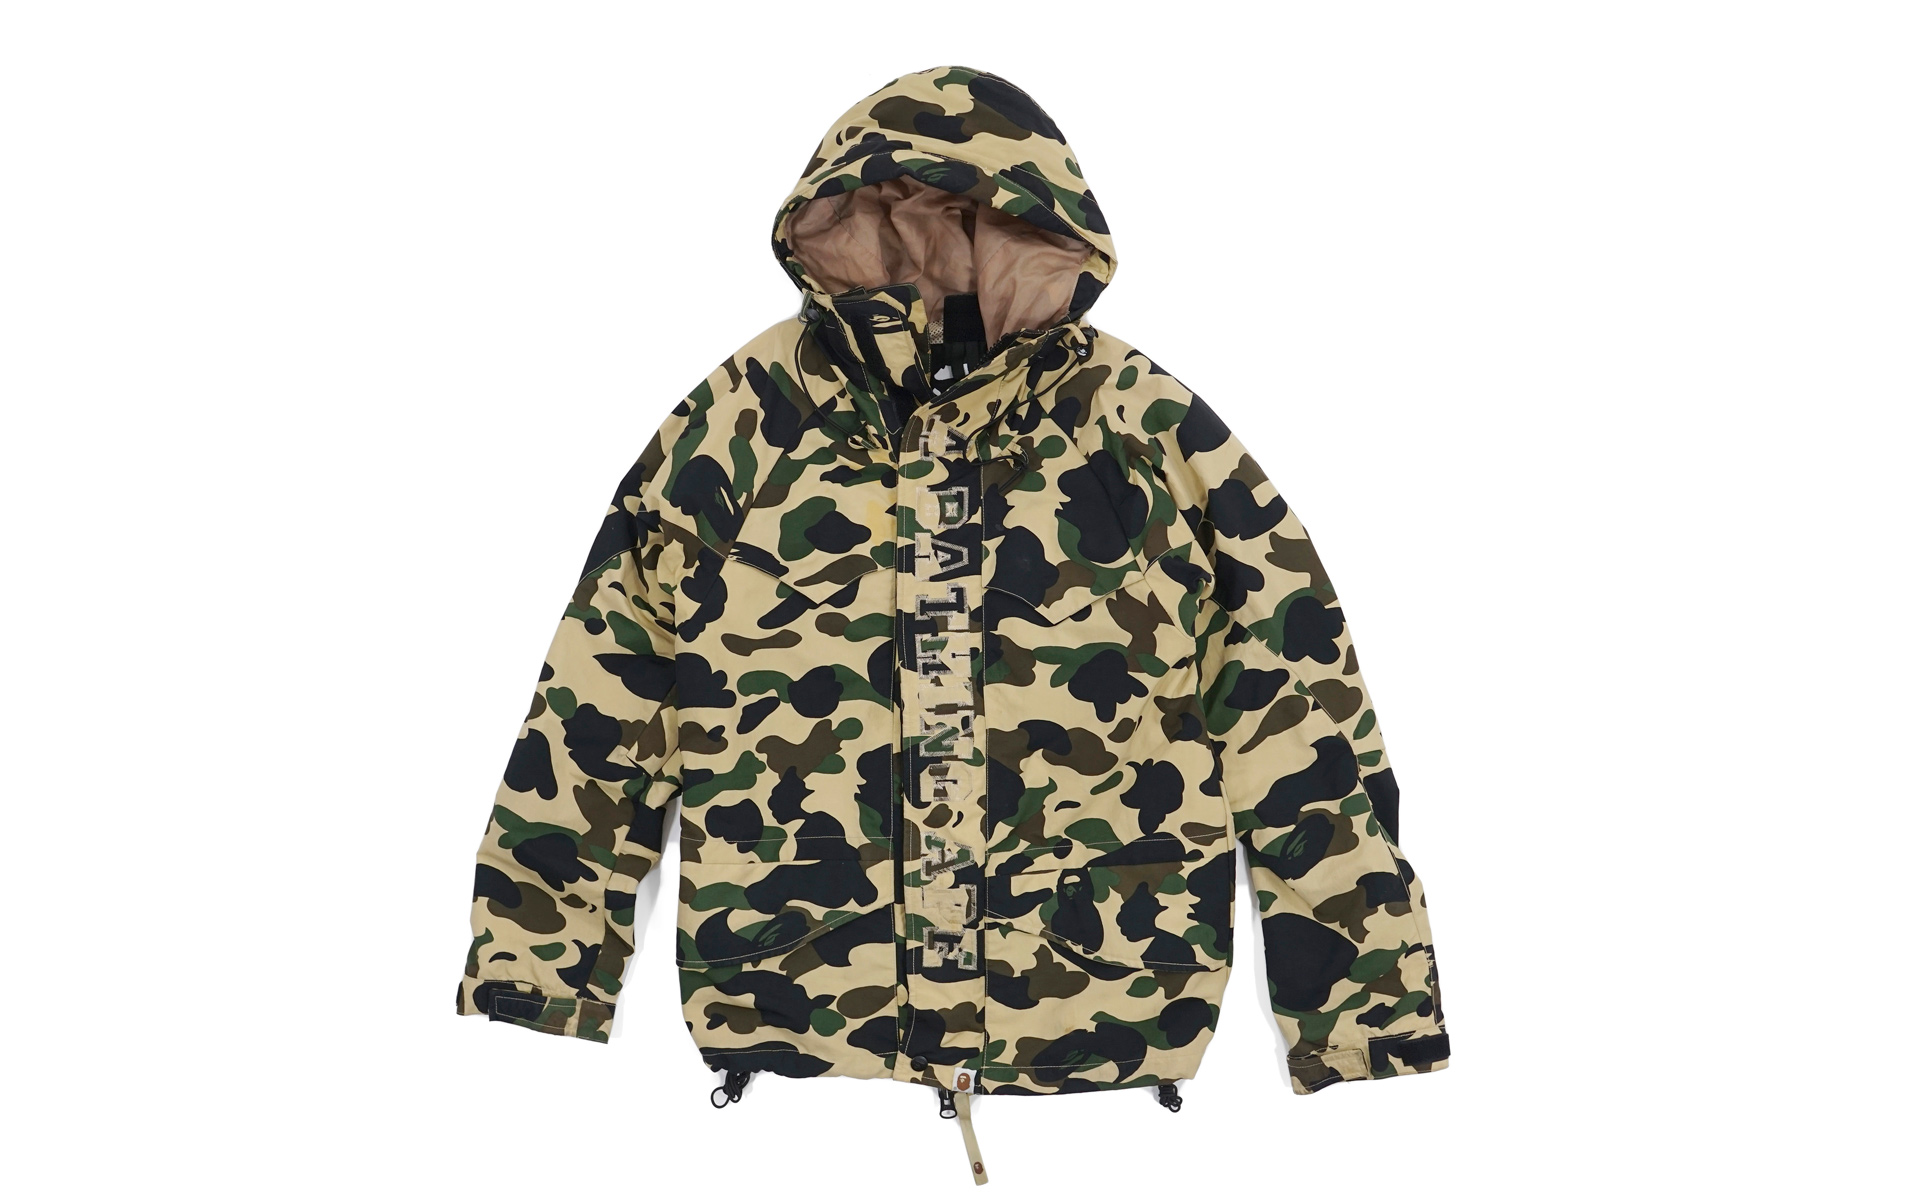 Best Style Releases This Week: BAPE, AWGE, Stüssy x Patta, The North Face,  and More